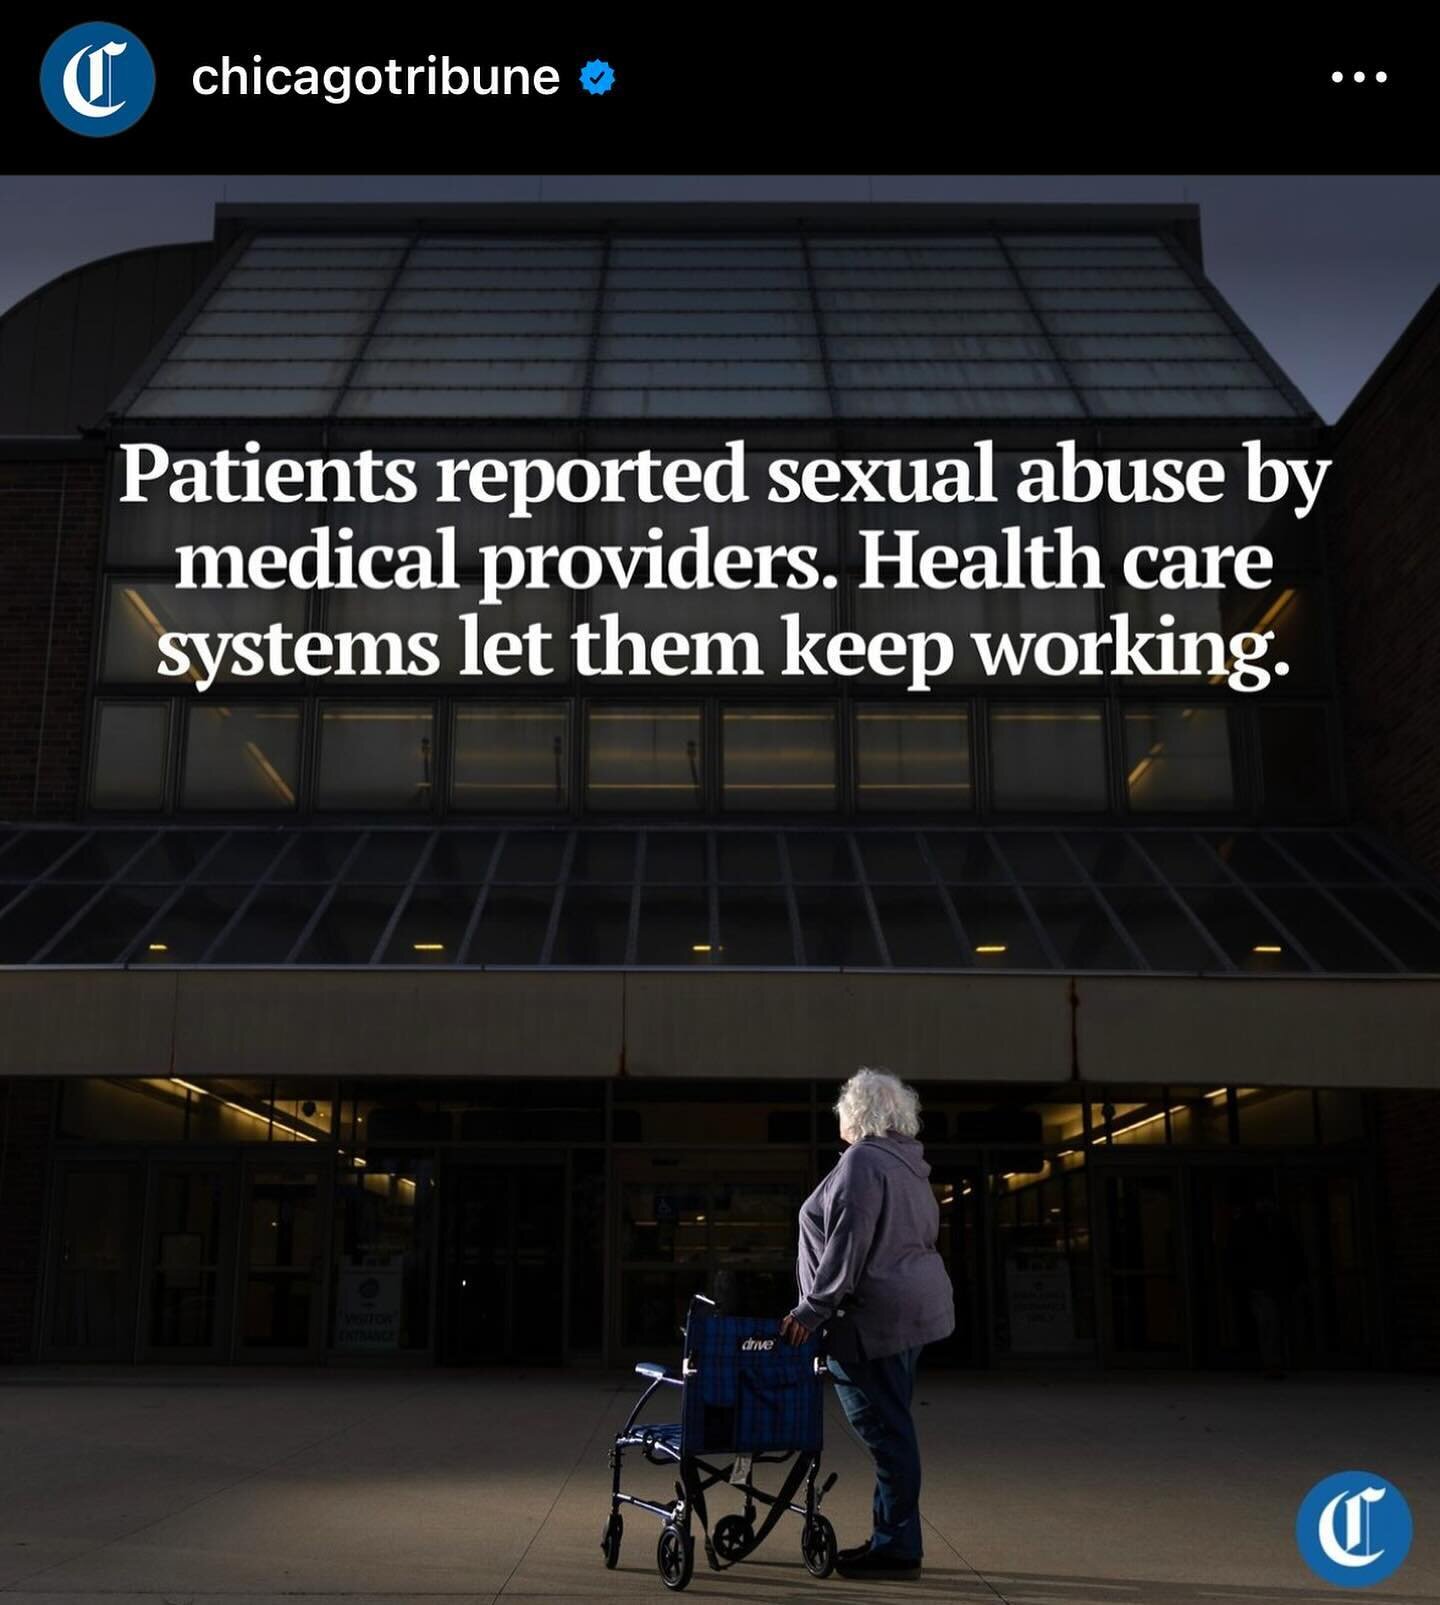 Horrifying news from my own city, also not surprising because we know clinical rape culture and medical sexual assault exist everywhere. Grateful to @chicagotribune and @repcassidy for this work. I&rsquo;ll keep writing and publishing on the clinical